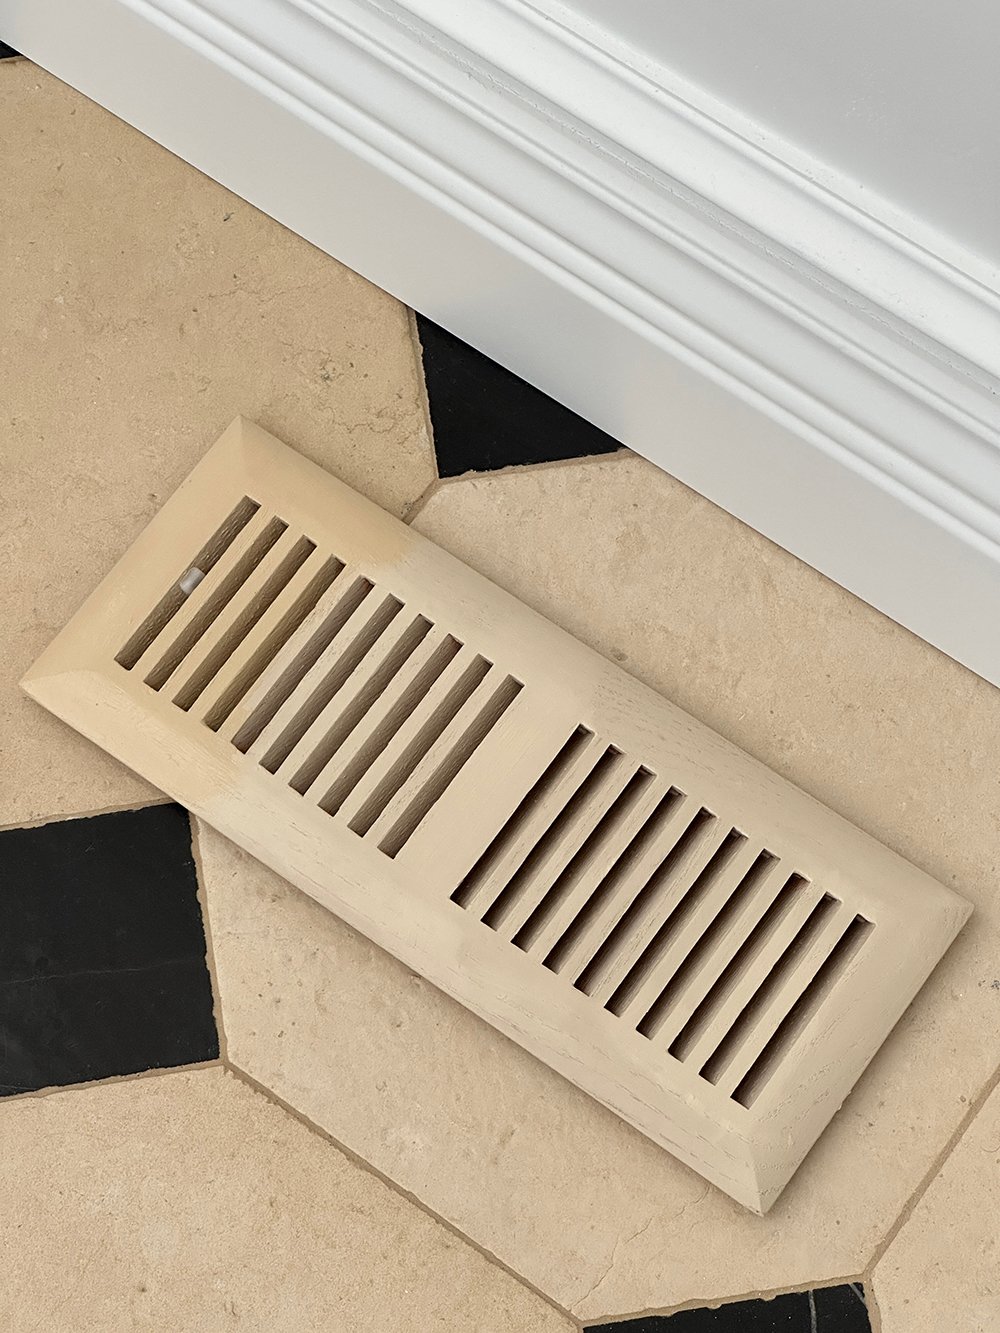 How to Faux Paint a Vent Cover to Seamlessly Blend with Stone - roomfortuesday.com